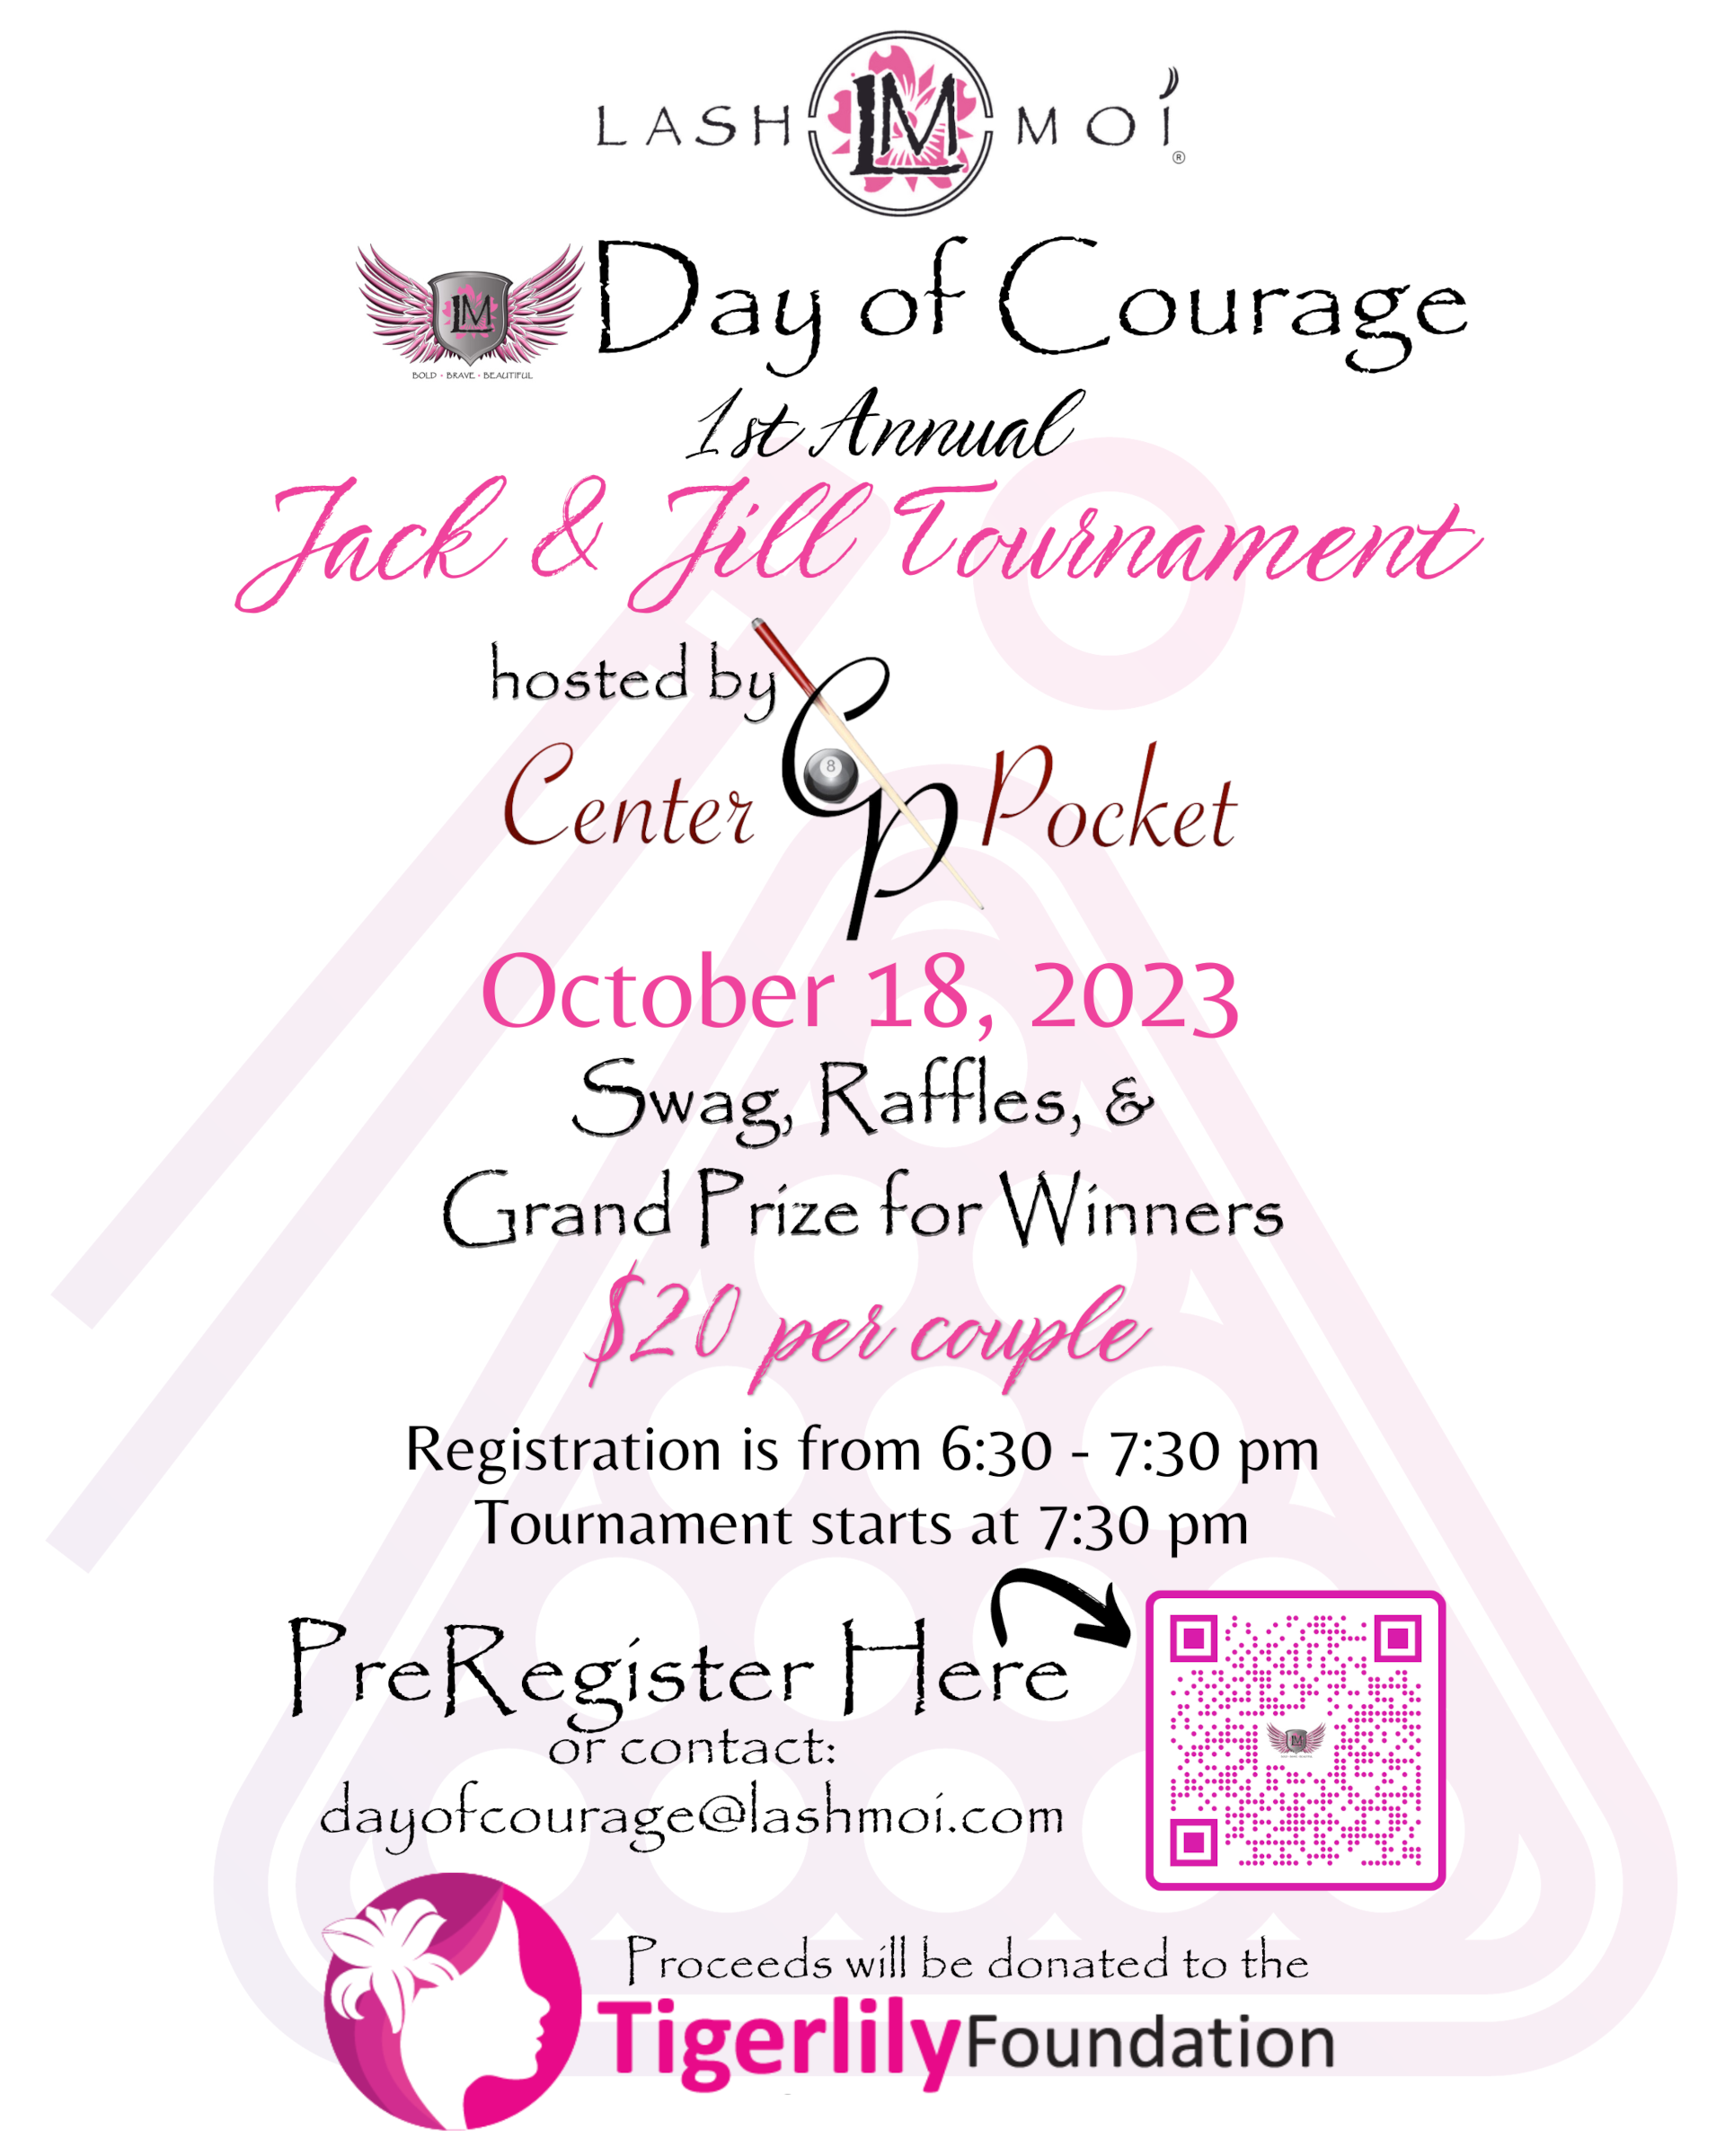 1ST ANNUAL “JACK & JILL POOL TOURNAMENT” ON OCTOBER 18, 2023